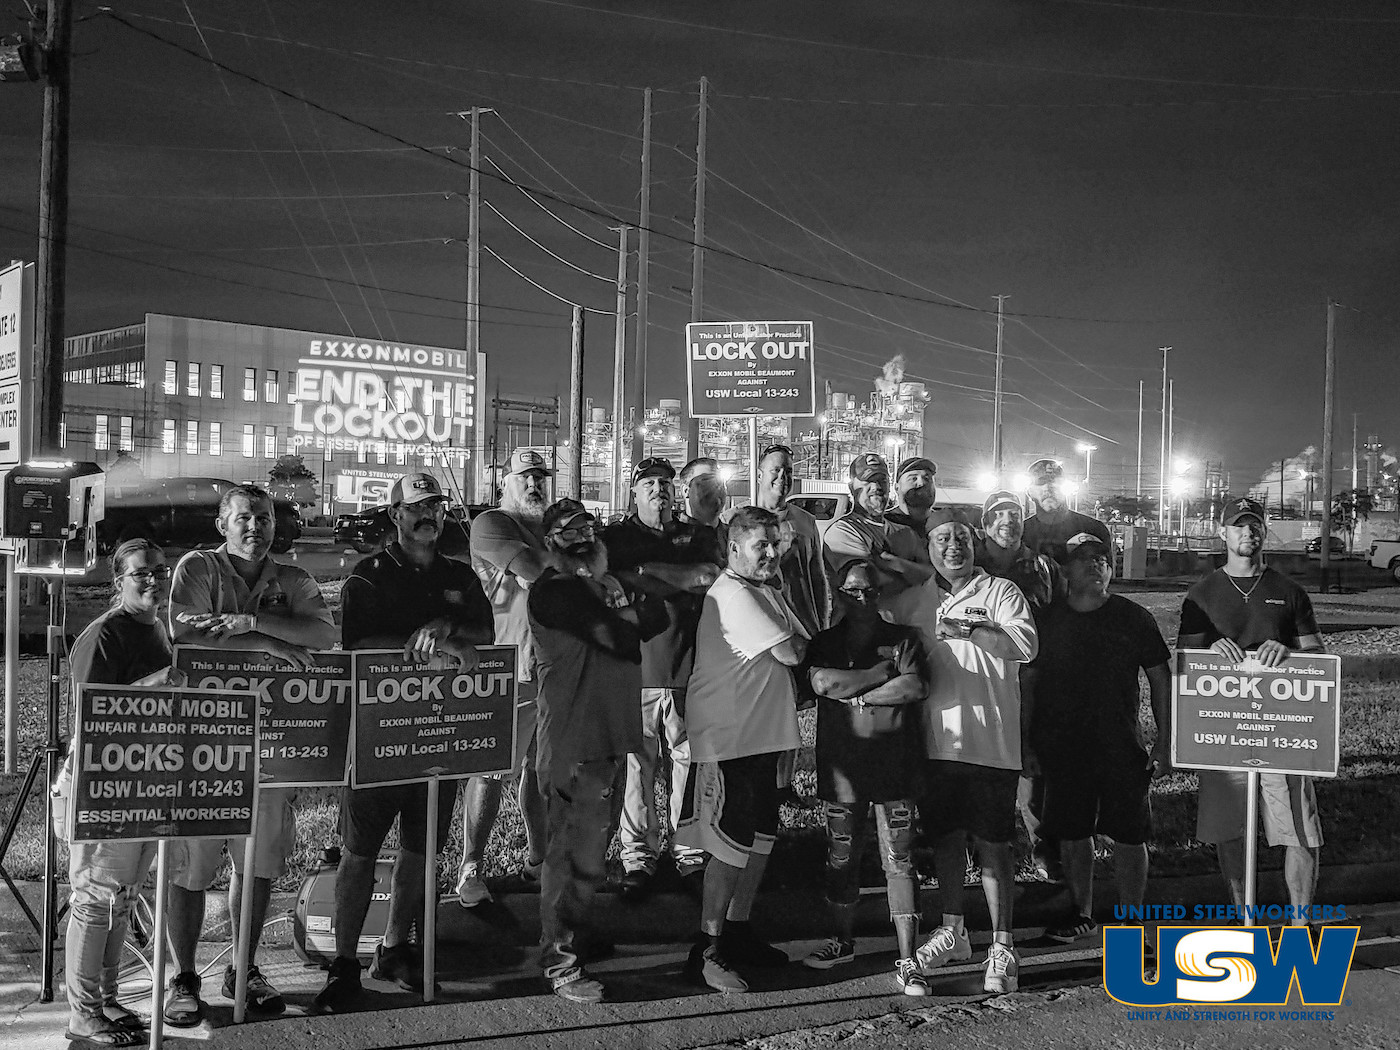 Jobs Workers stand in a group outside a refinery in Beaumont, Texas holding signs that say 